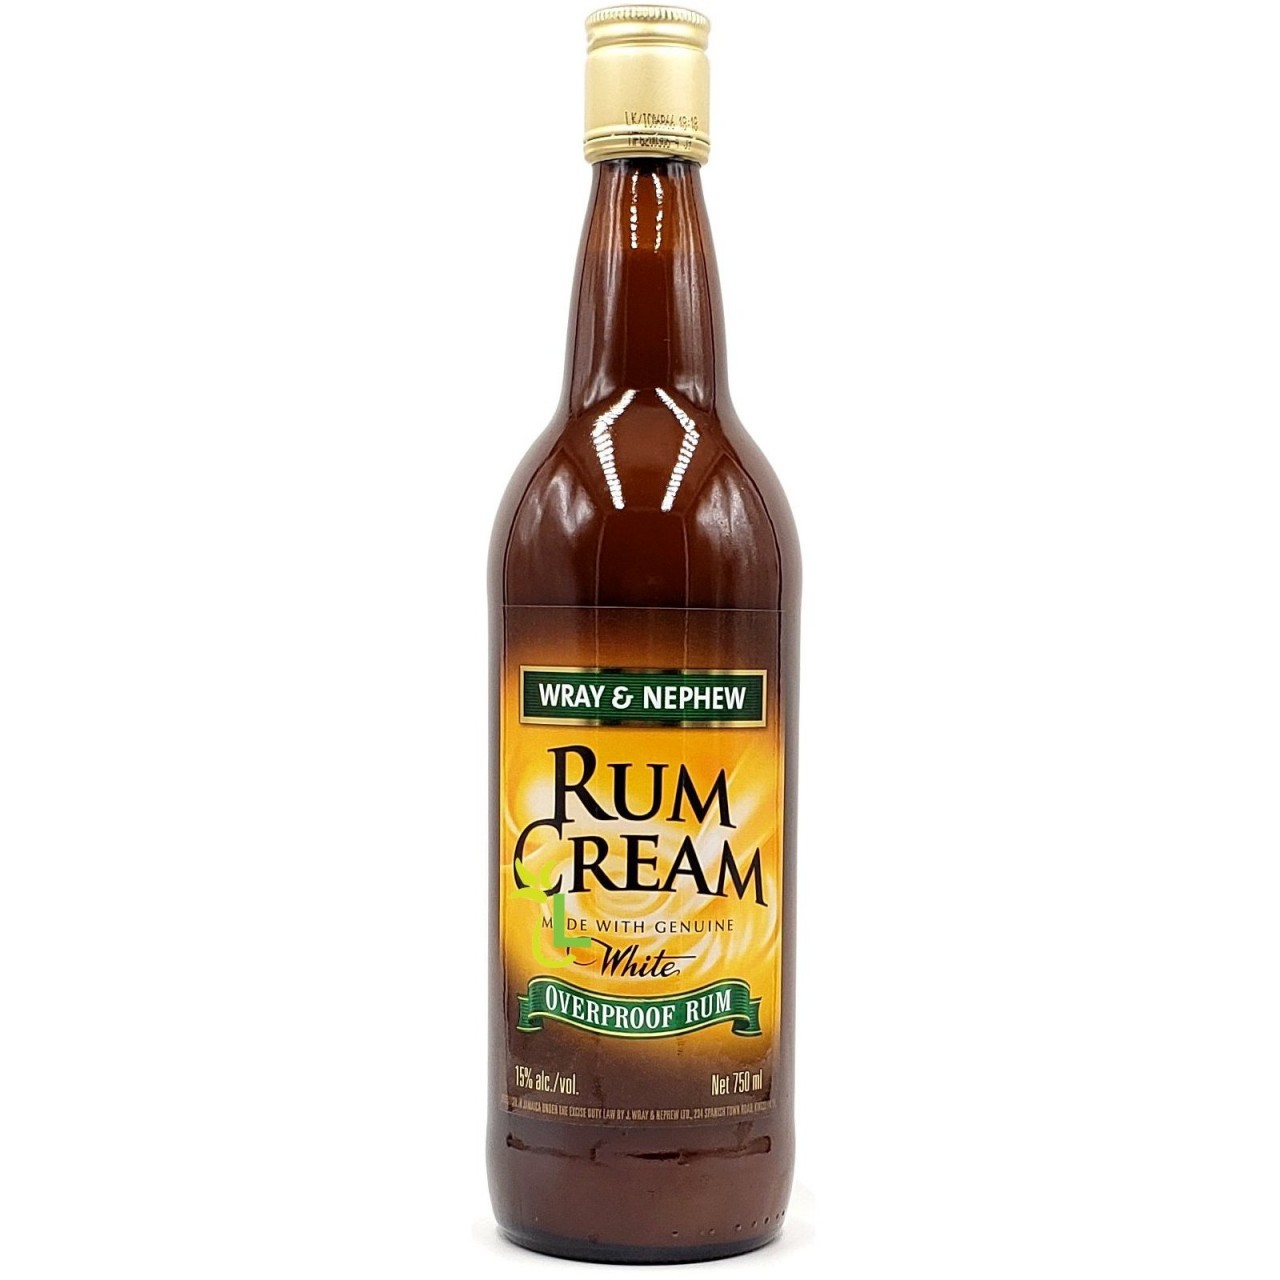 Pre-Order Your Wray And Nephew Rum Cream Online